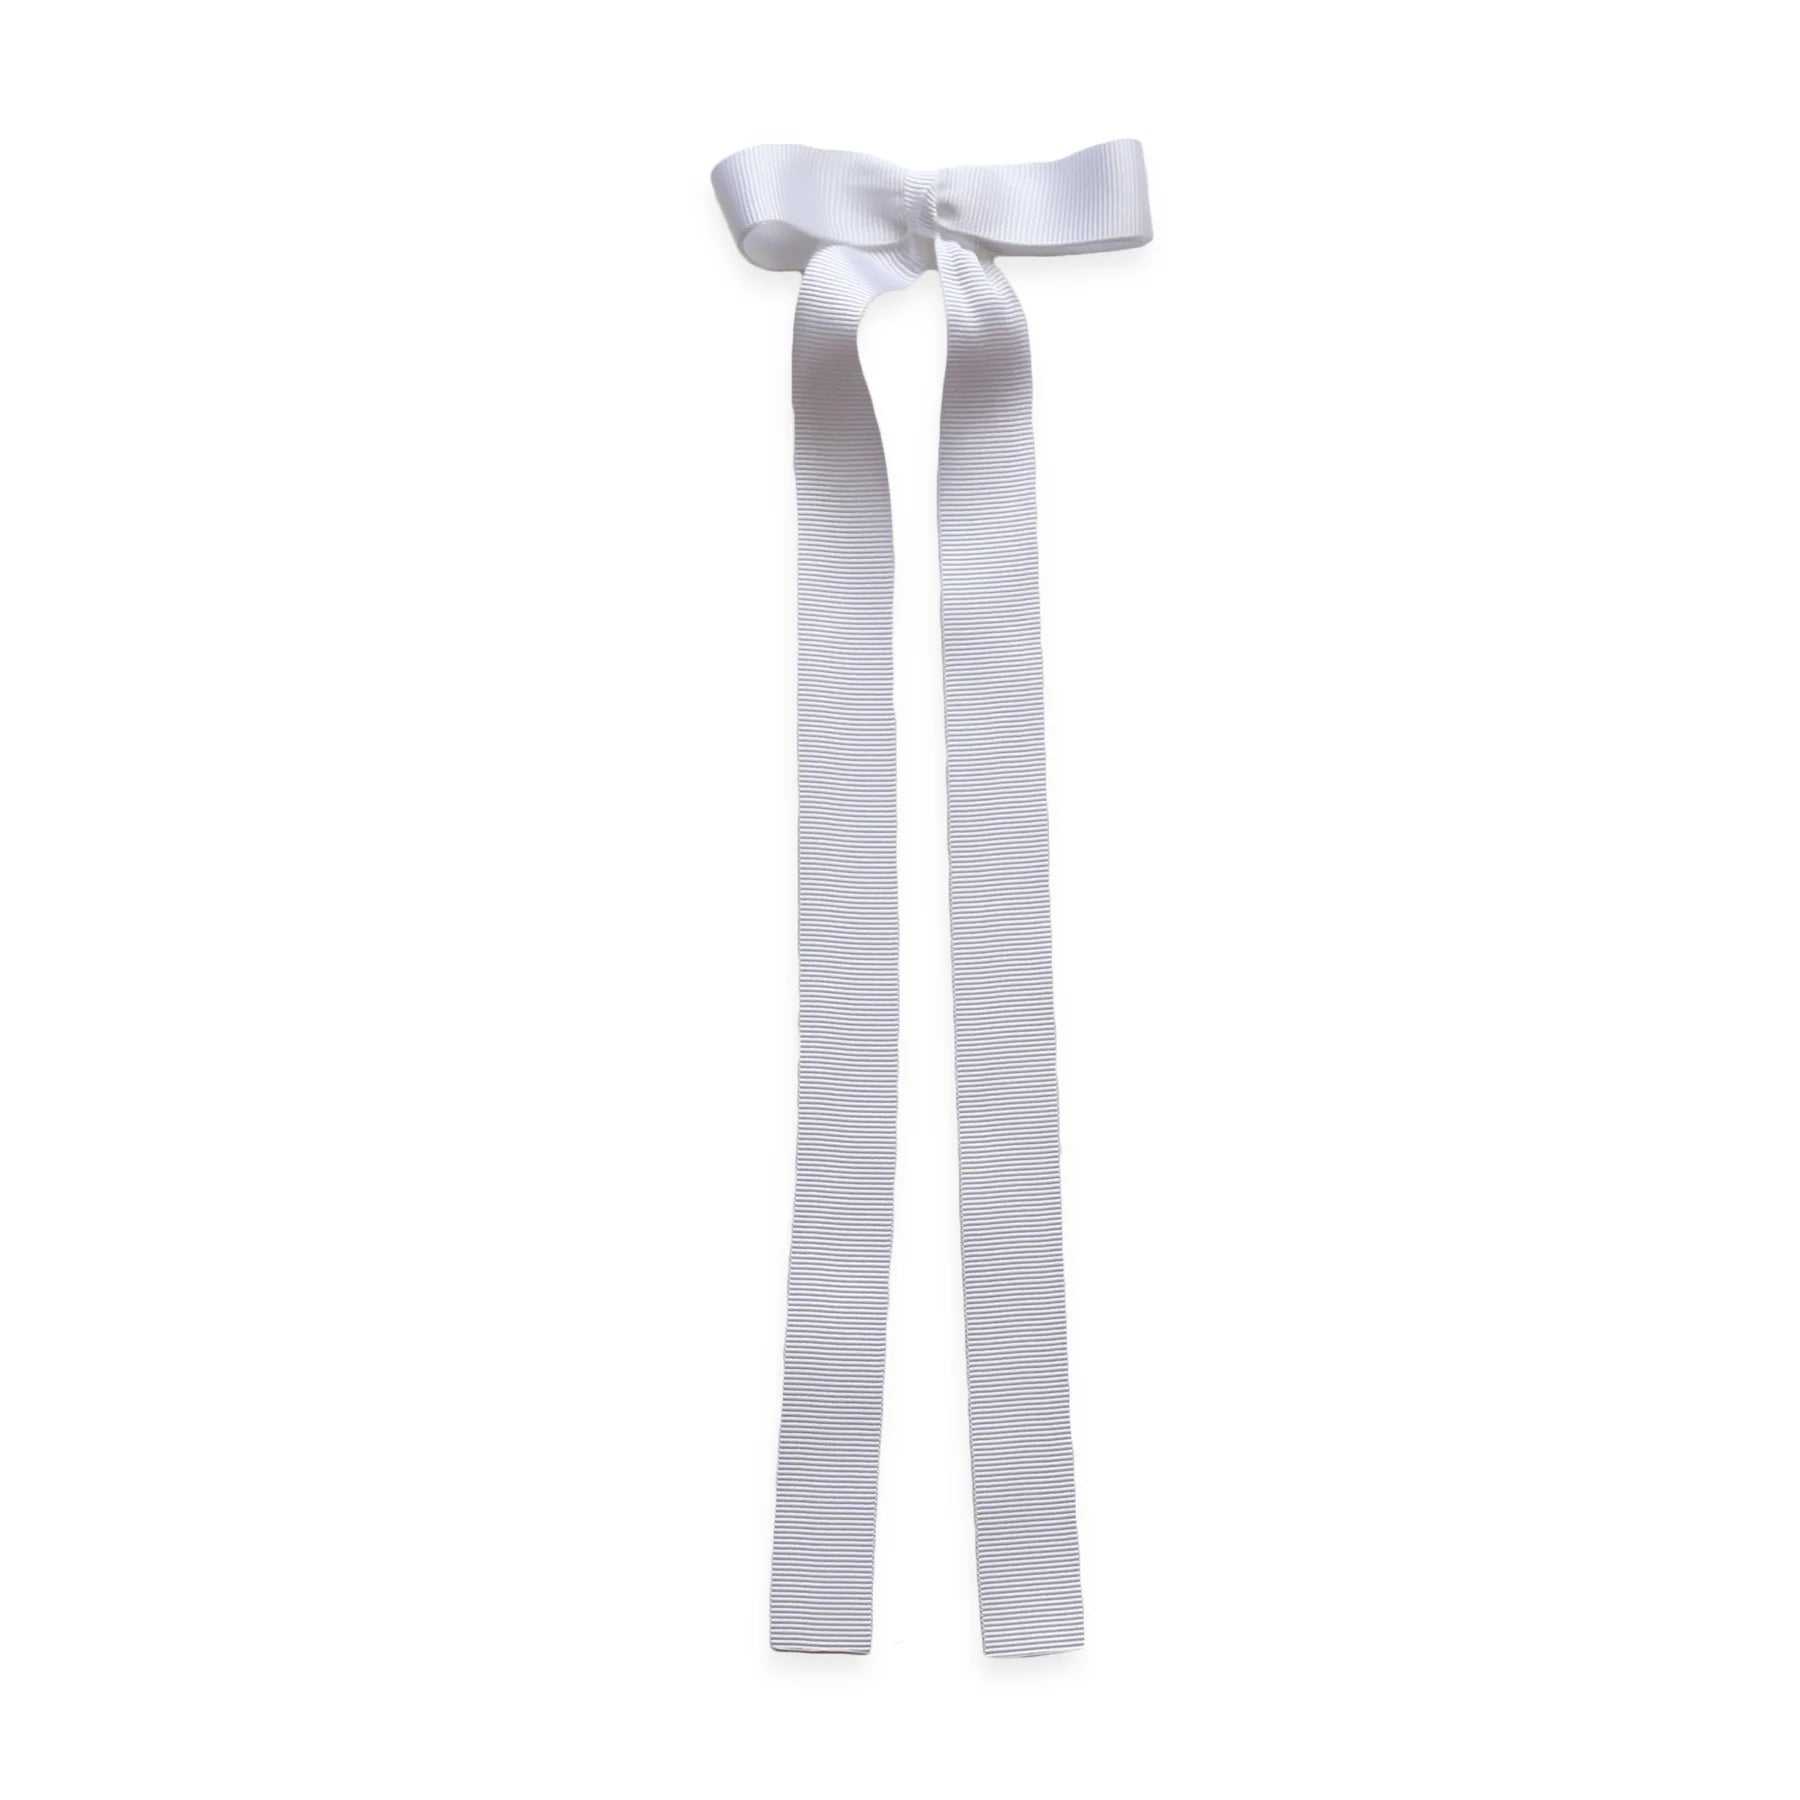 Wee Ones 6.5" Gros Grain Long Tail Bow in White